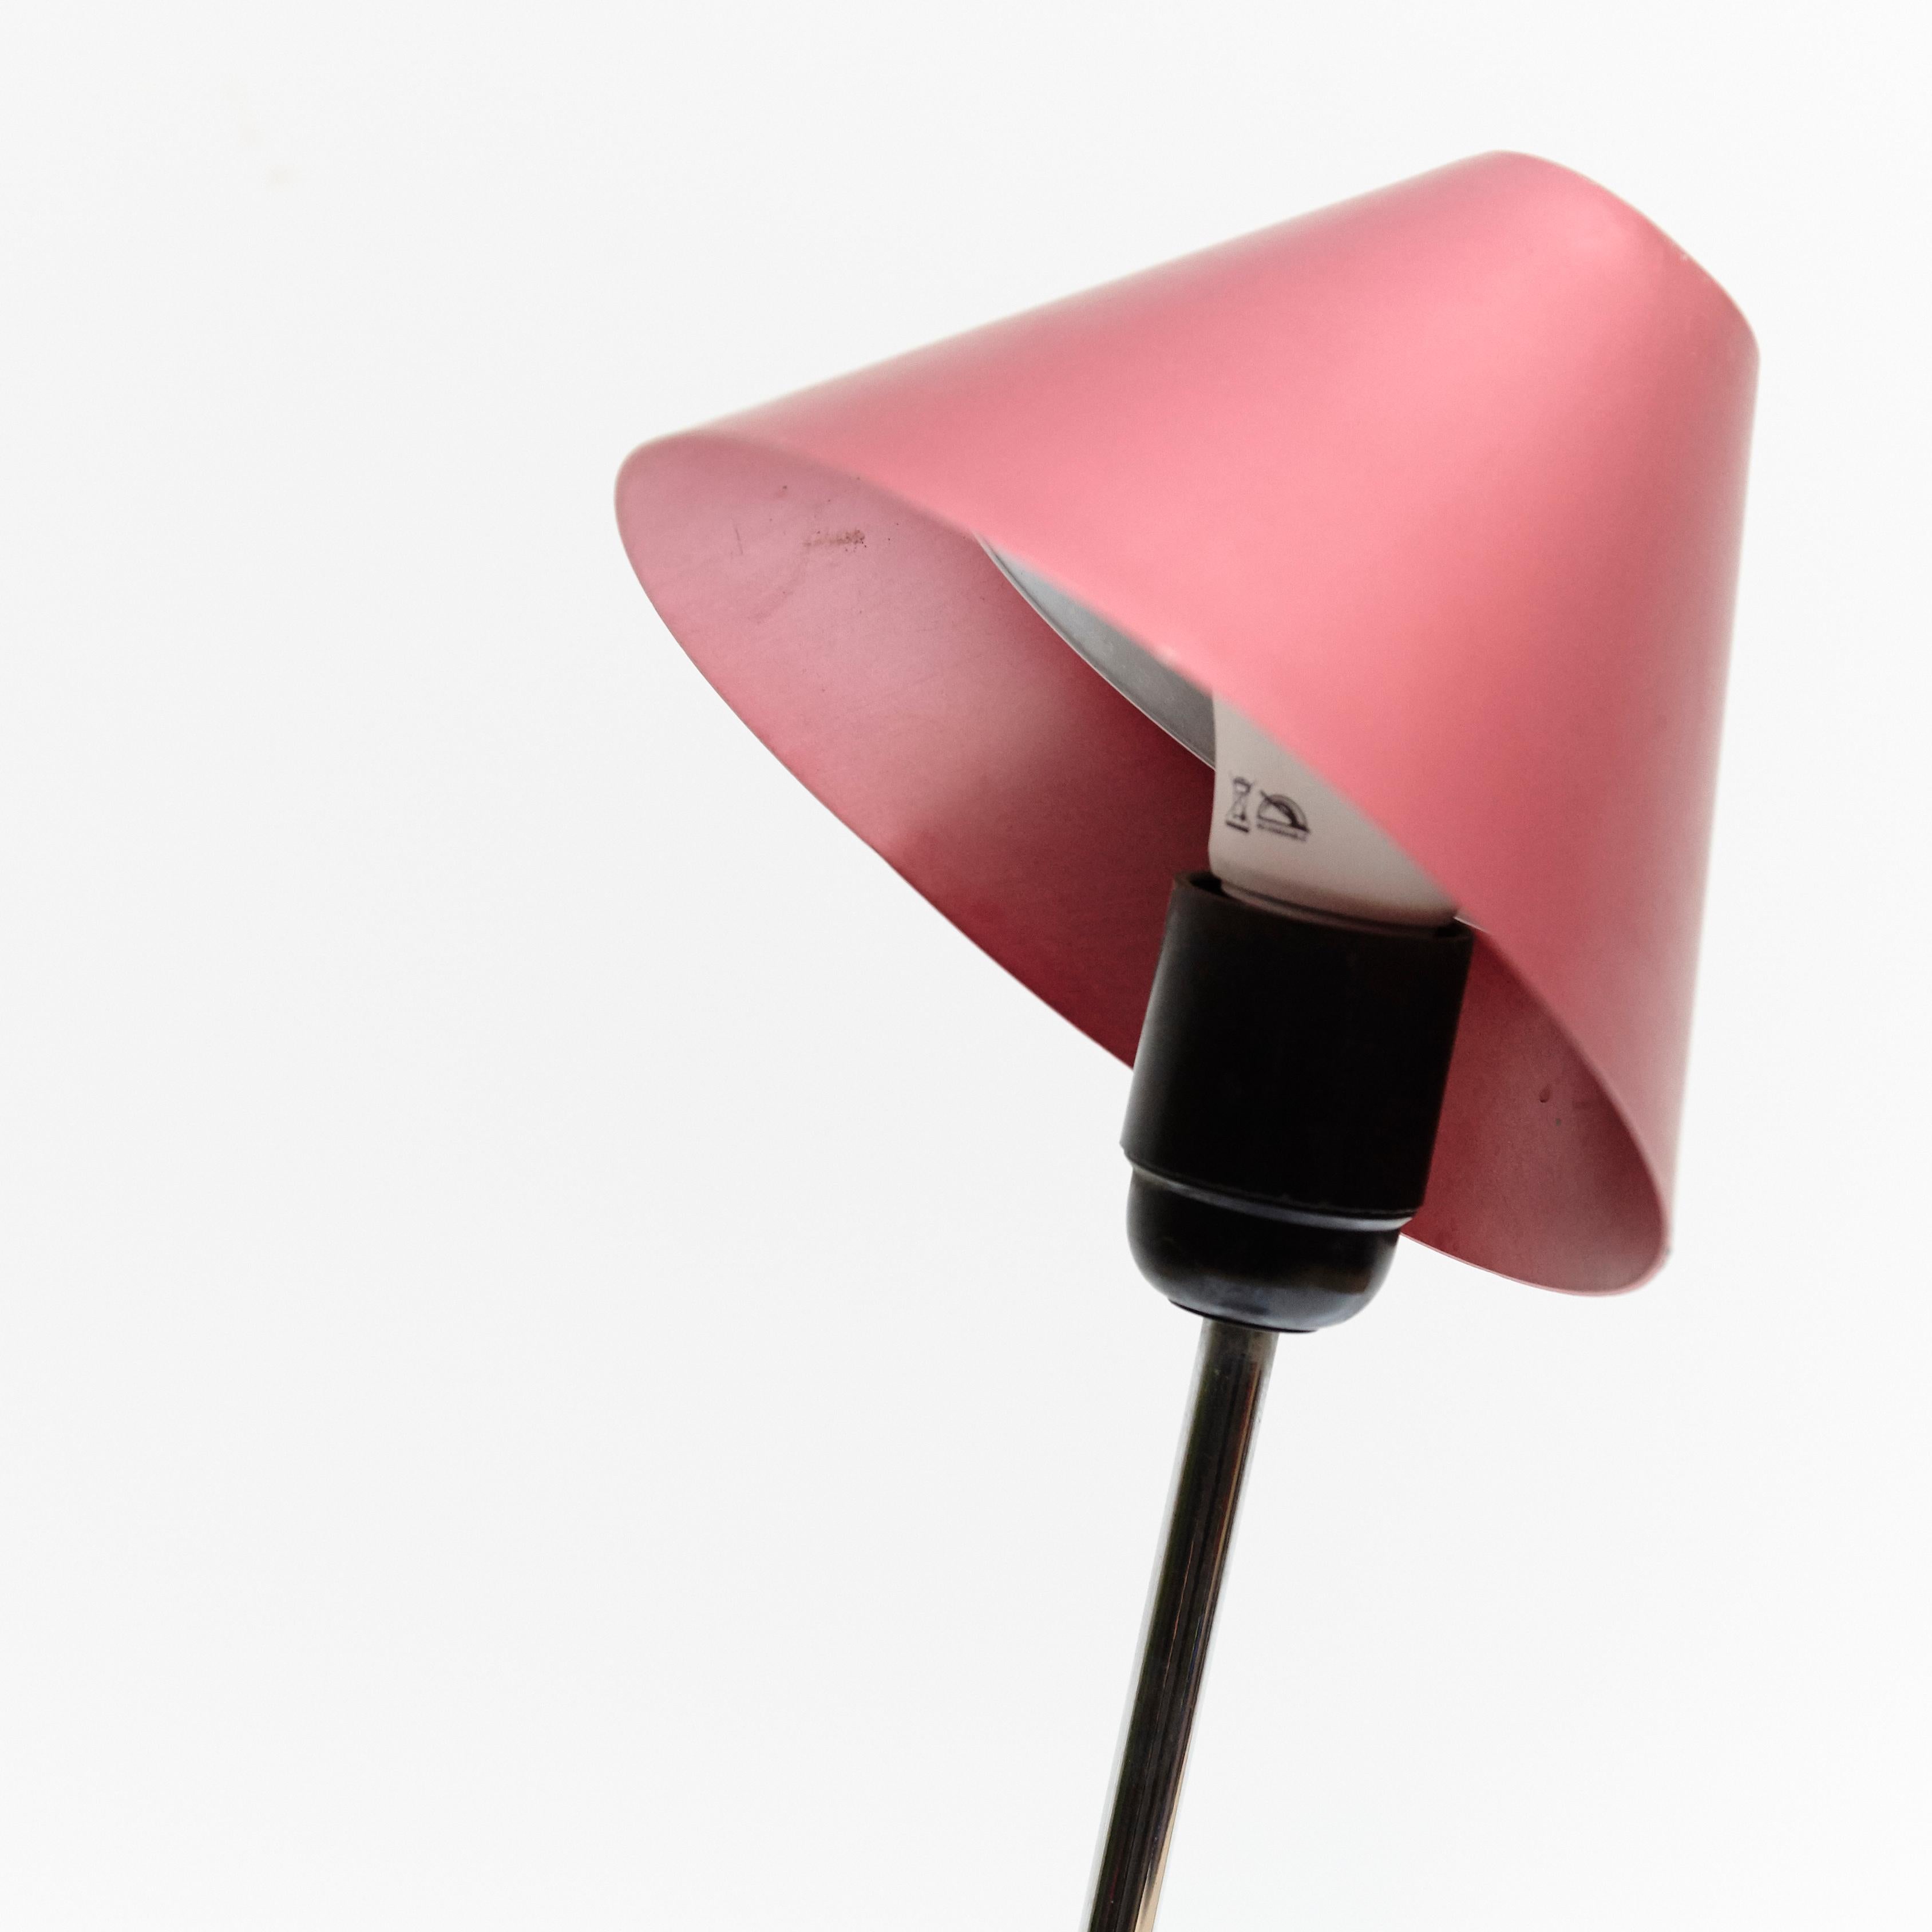 Metal Lamp Designed by Mobles 114, Barcelona, 1978